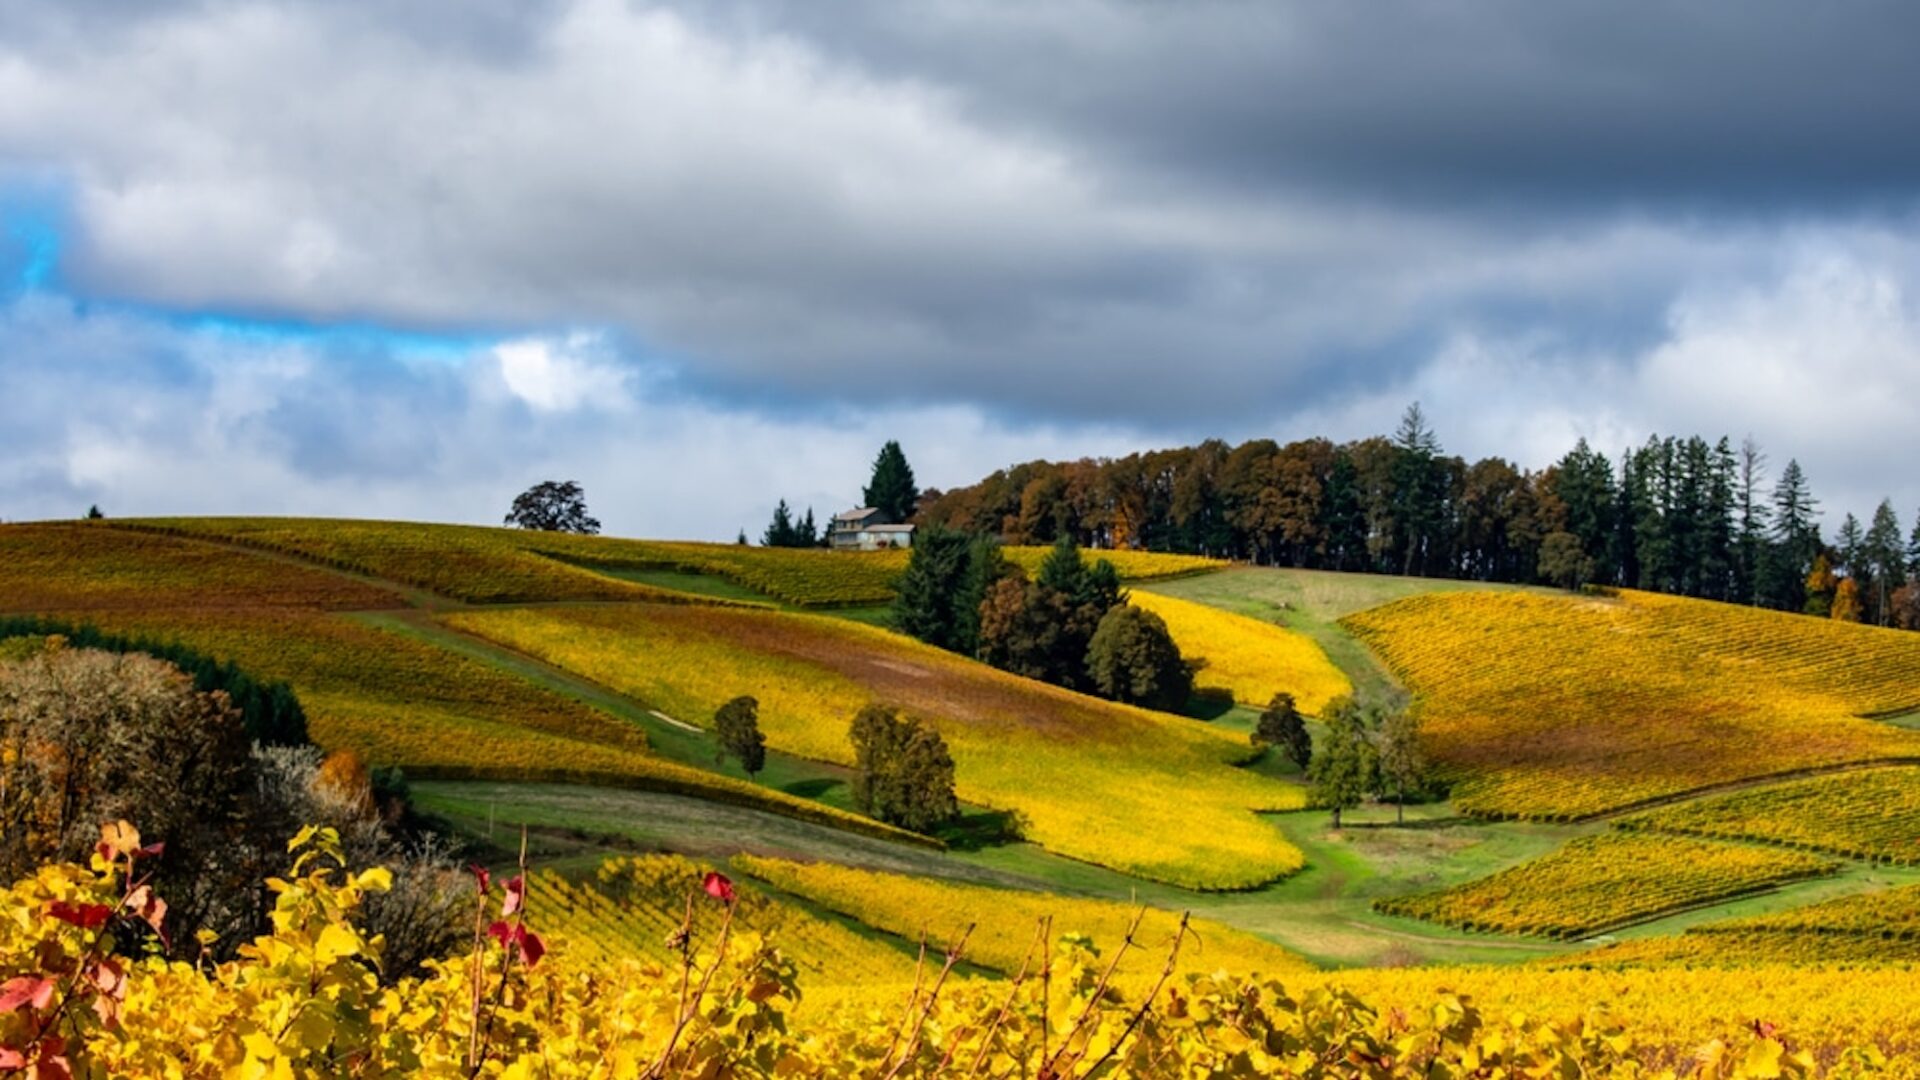 Looking up a hill covered with golden vines in October in an Oregon vineyard under a blue sky with gray clouds.